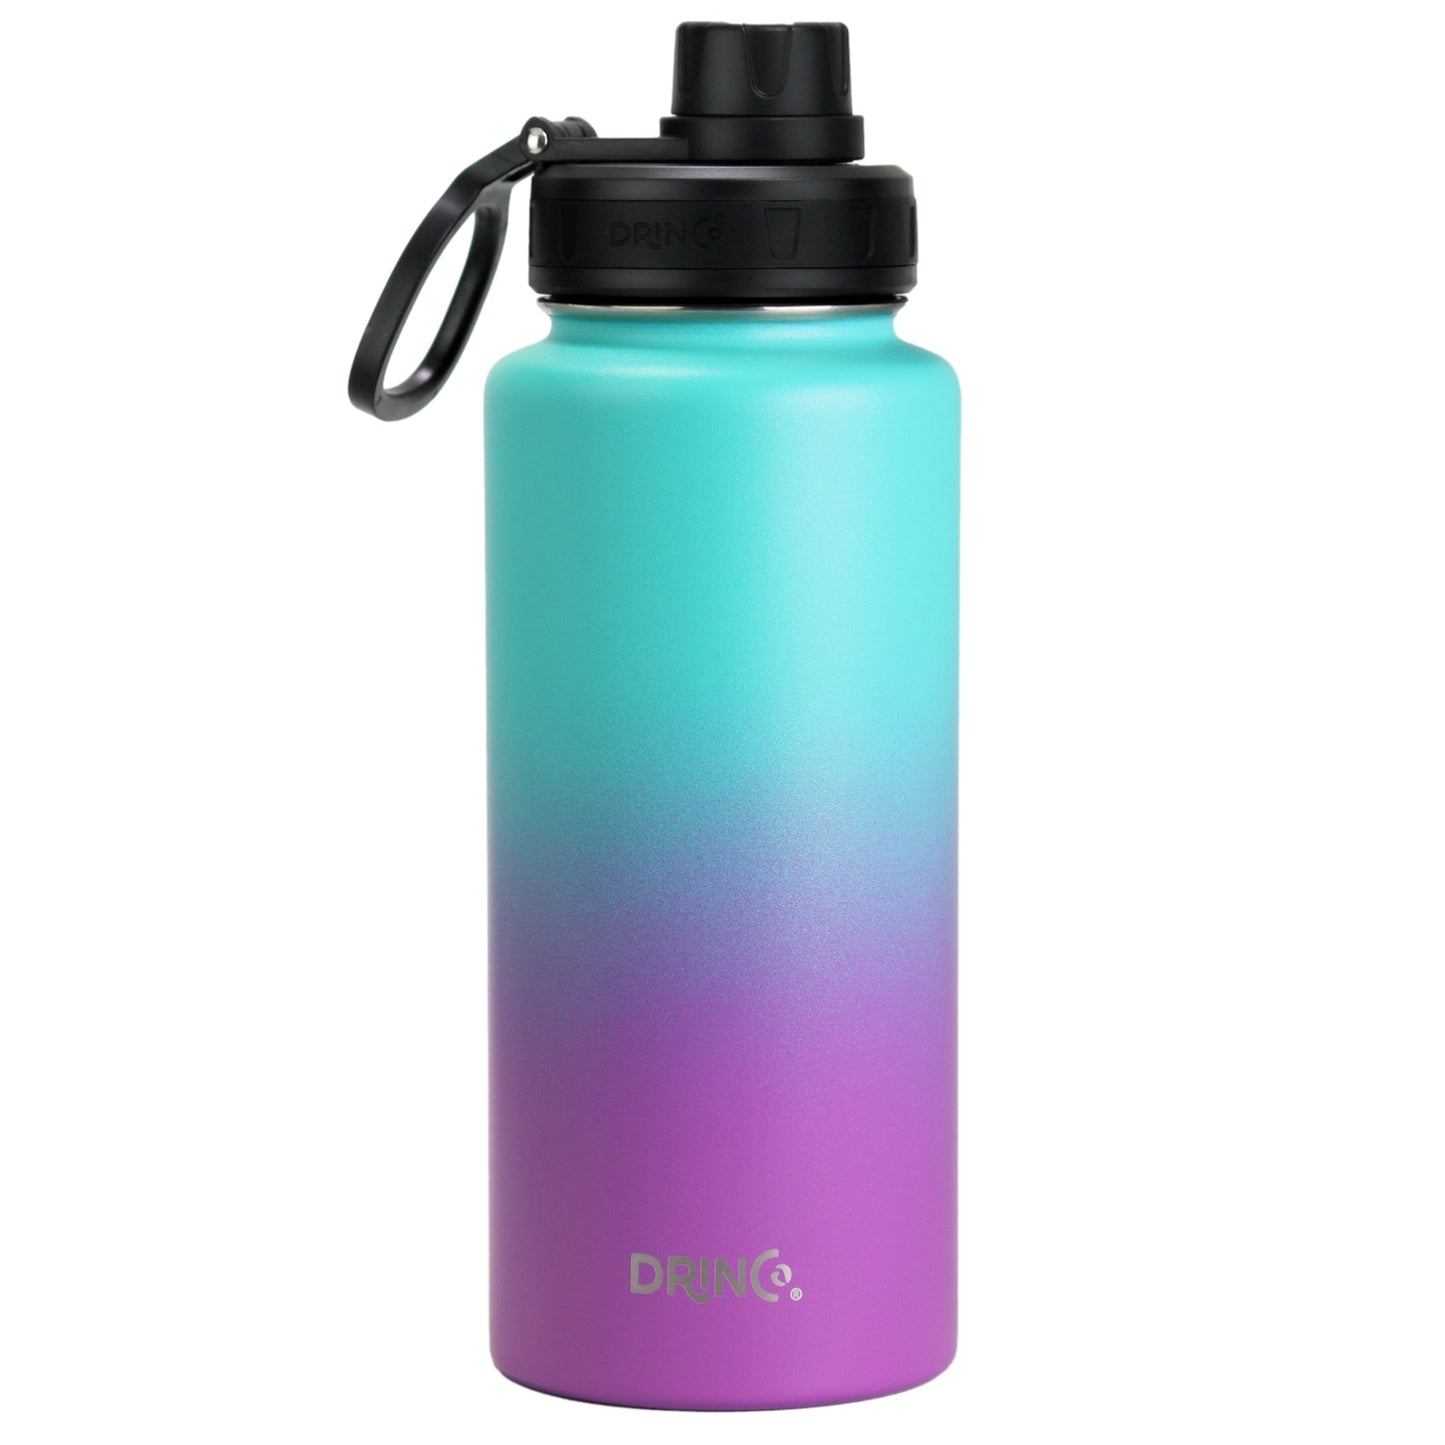 DRINCO® 32oz Stainless Steel Water Bottle - Ombre Fuchsia Teal